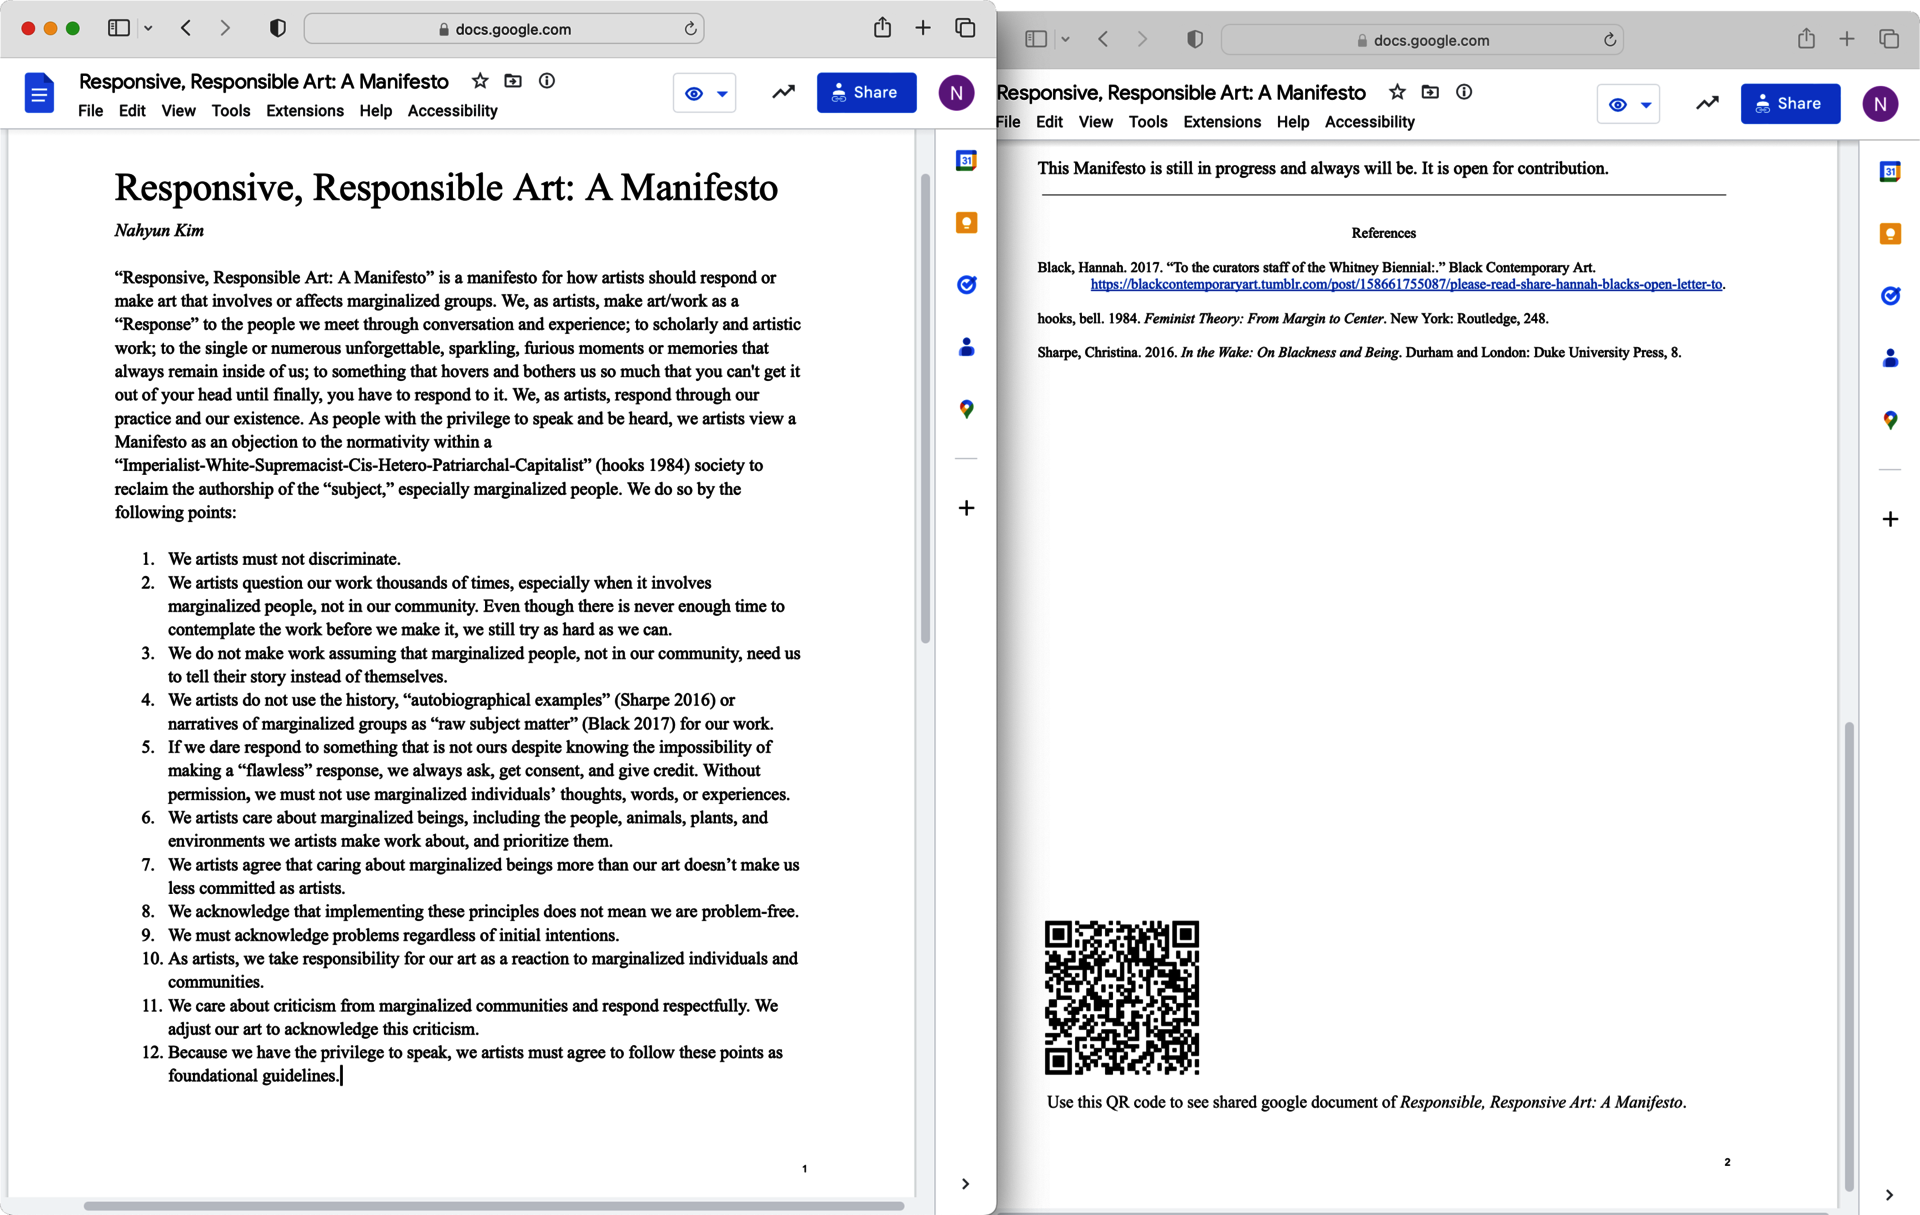 Two pages of “Responsive, Responsible Art: A Manifesto” displayed in a Google Doc. The left page shows a title, introduction paragraph, and a list of guidlines, while the right page presents references and a QR code for reader contributions. All text is black on a white background, except for a link to an article on the reference list.